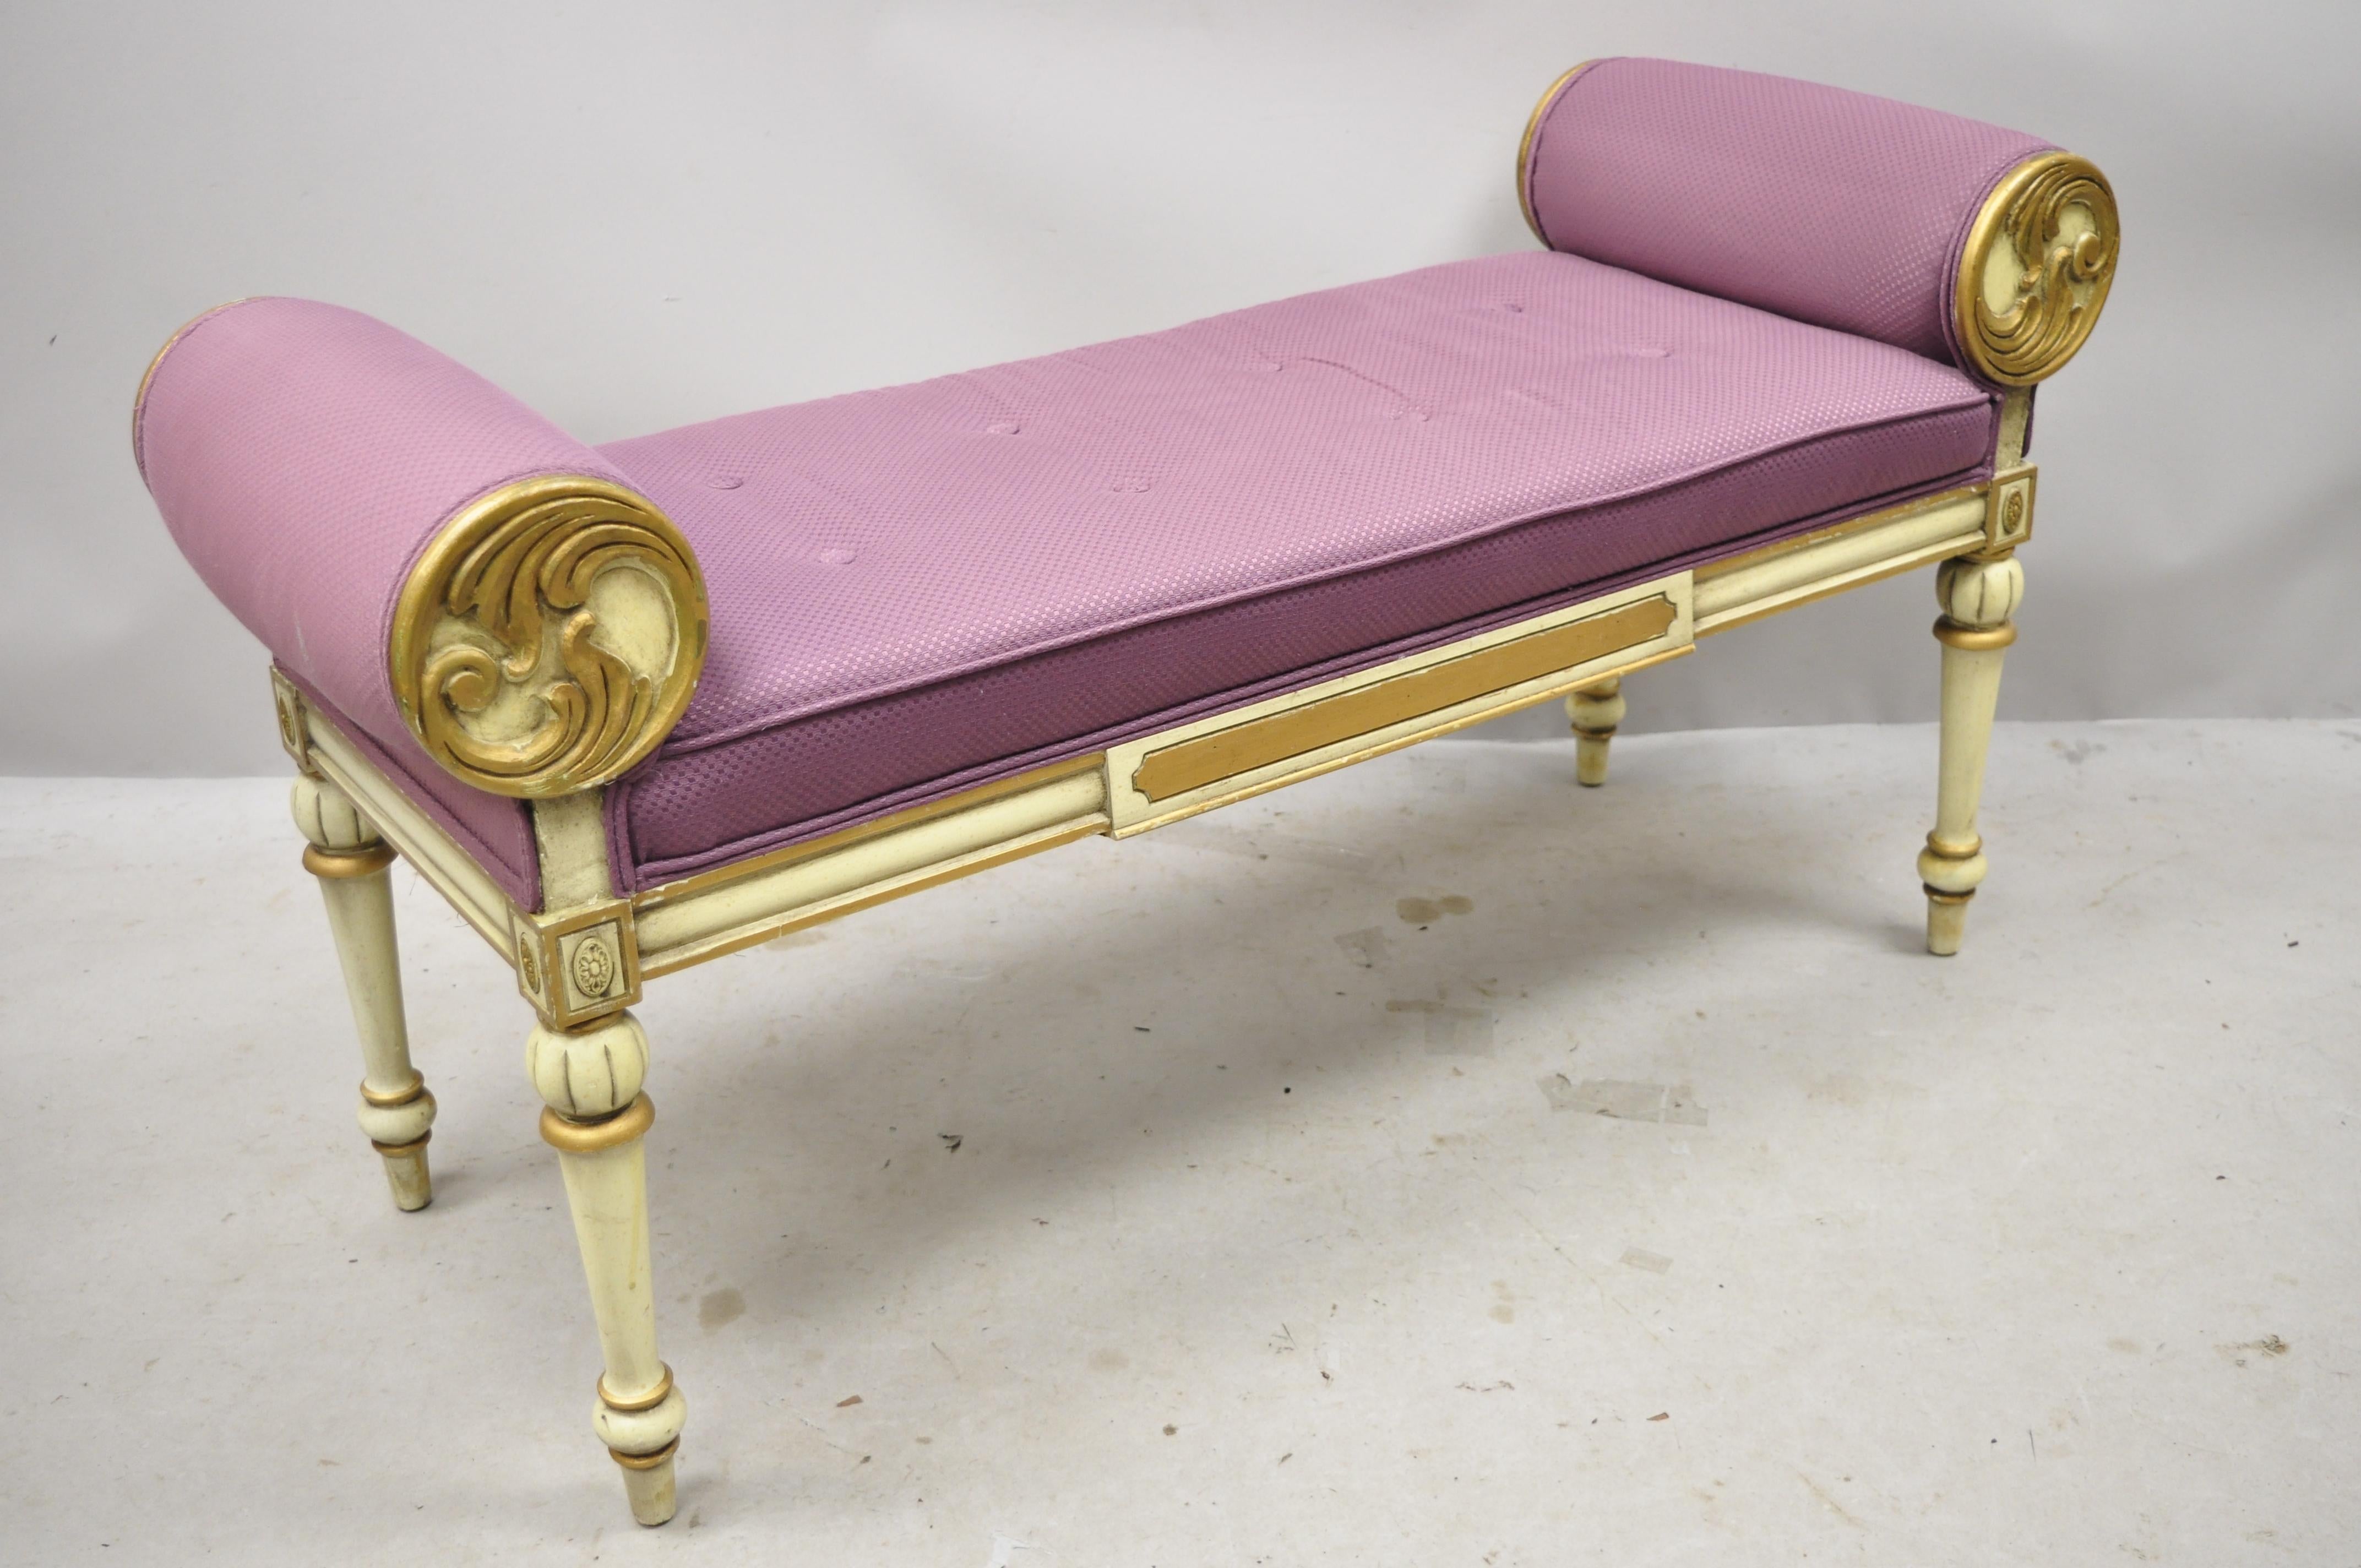 Vintage French Louis XVI Italian Provincial cream painted purple window bench. Item features rolled arms, purple tufted upholstery, solid wood frame, distressed finish, tapered legs, very nice vintage, great style and form, circa mid-20th century.